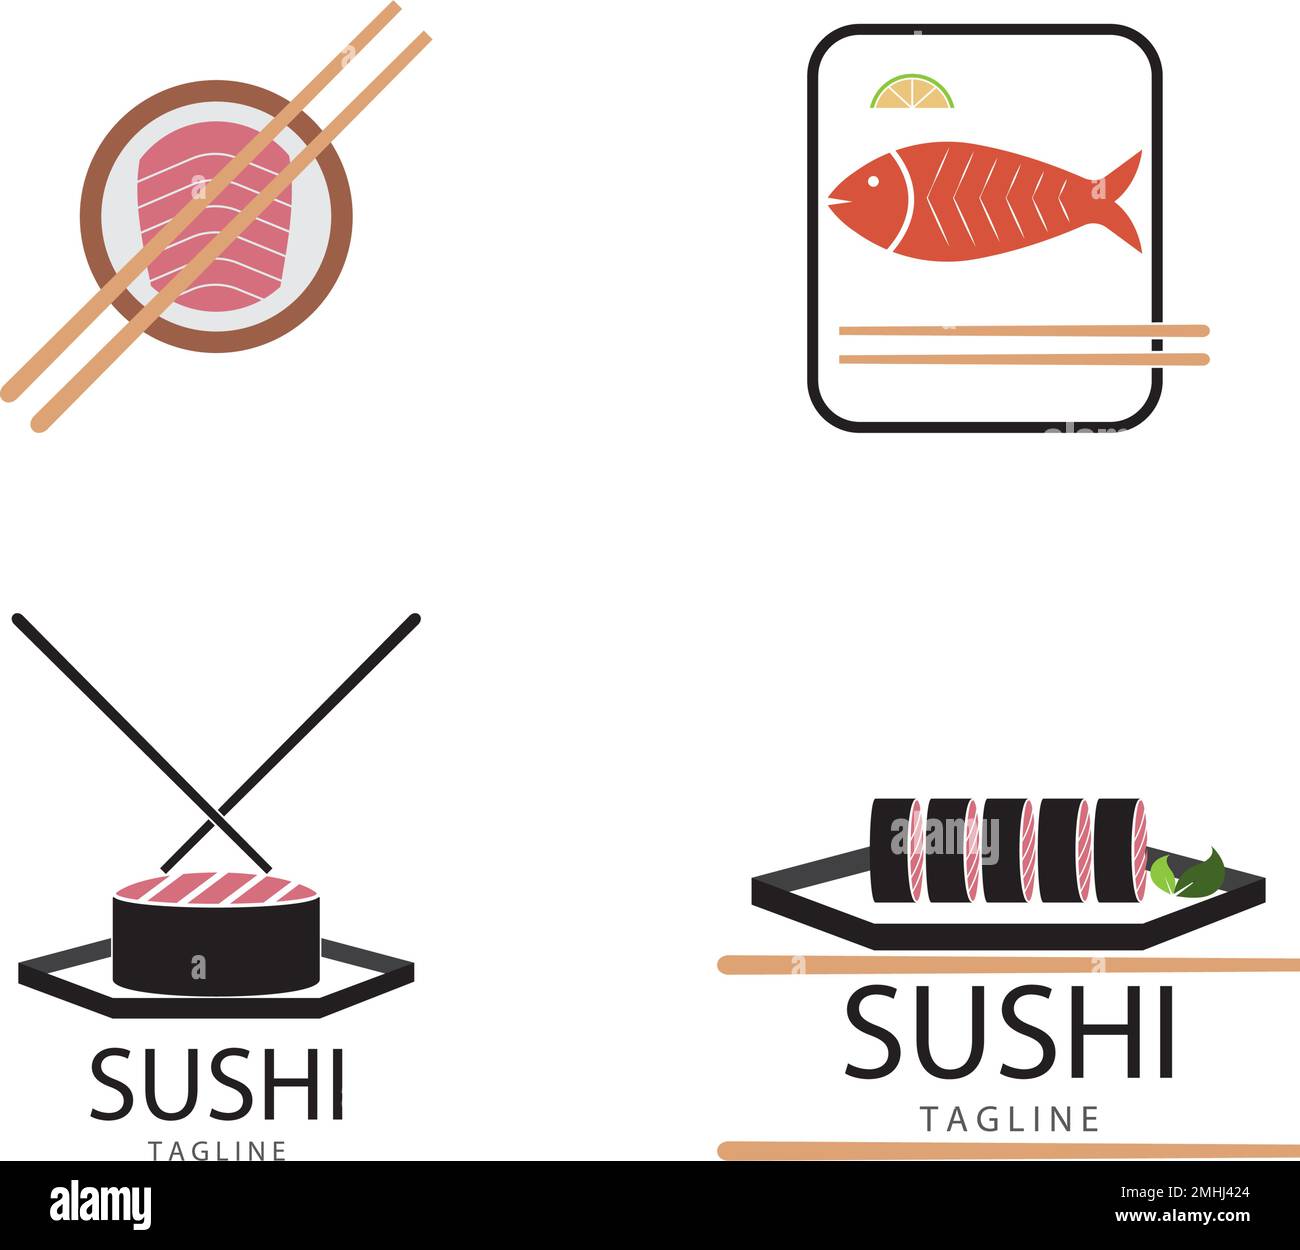 Sushi logo template vector icon for japanese food illustration design Stock Vector